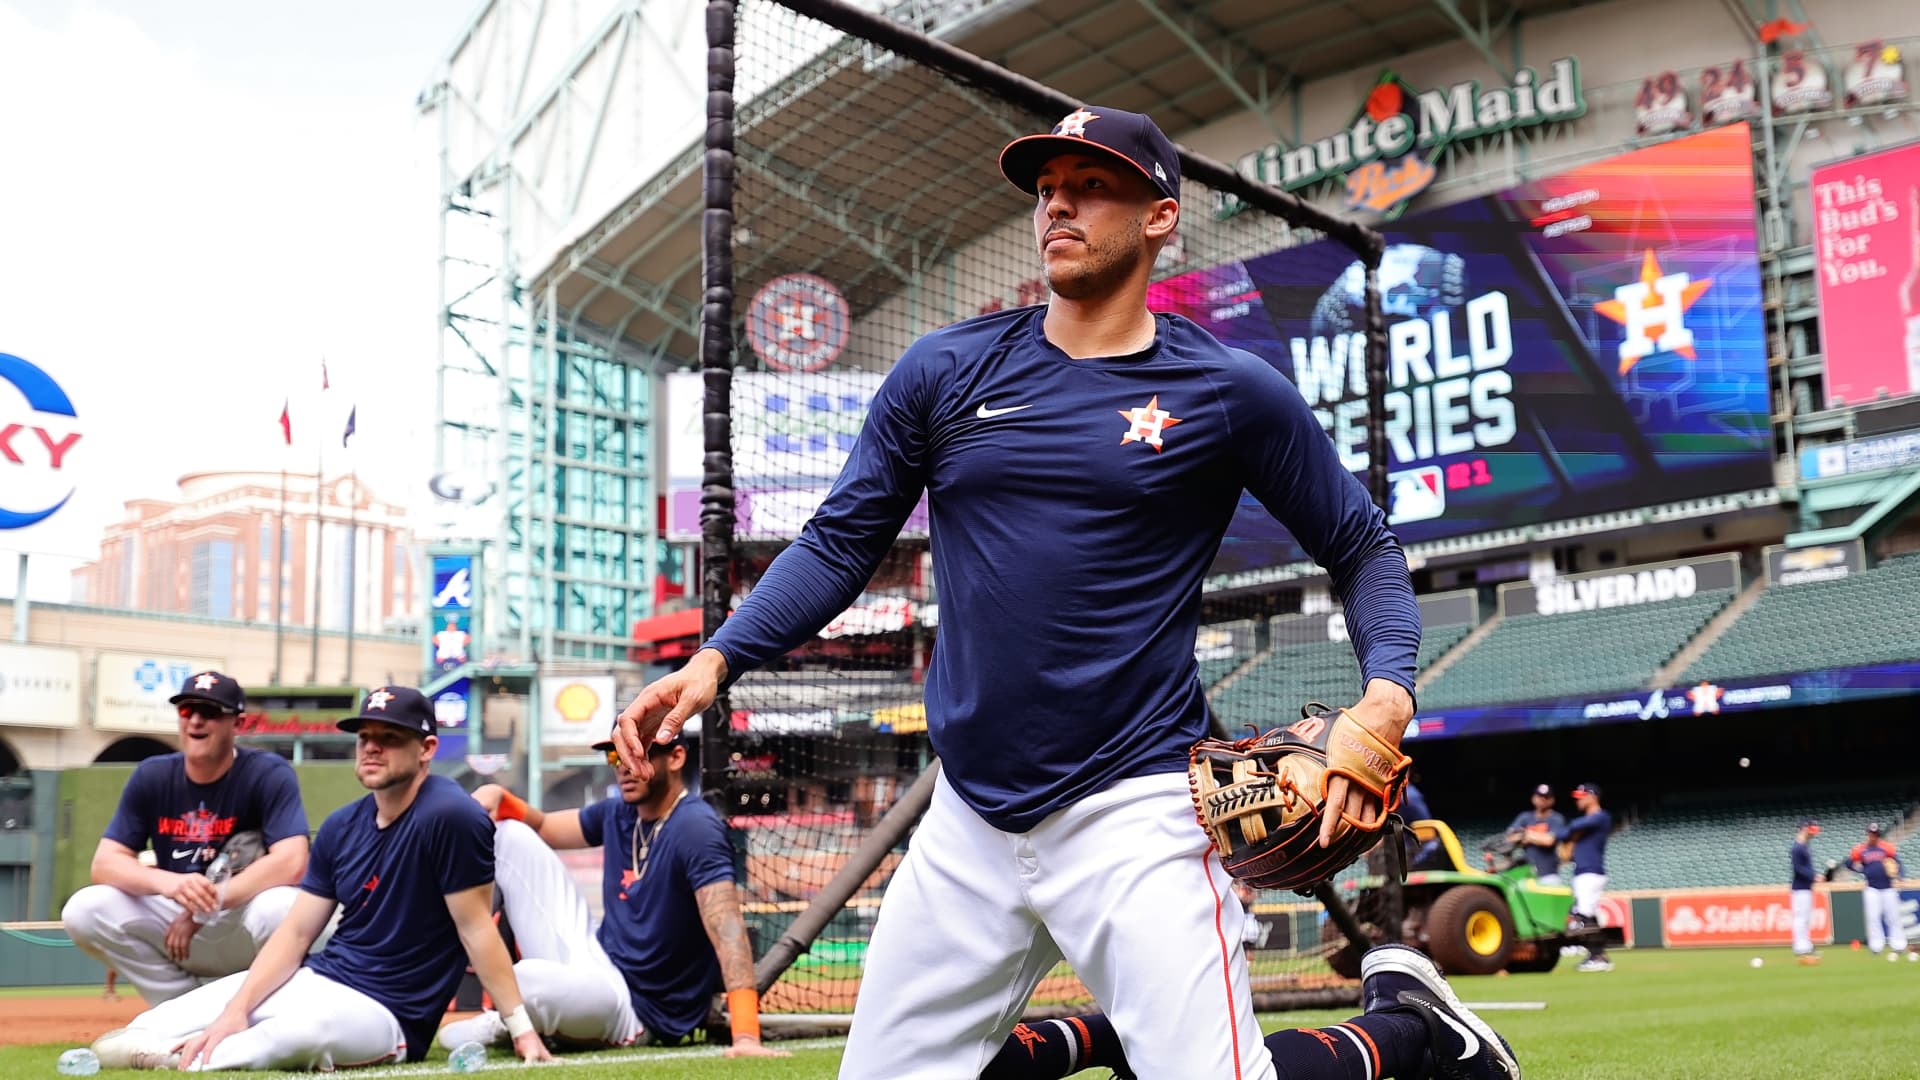 Carlos Correa #1 of the Houston Astros participates in a workout prior to the start of the World Series against the Atlanta Braves at Minute Maid Park on October 25, 2021 in Houston, Texas.